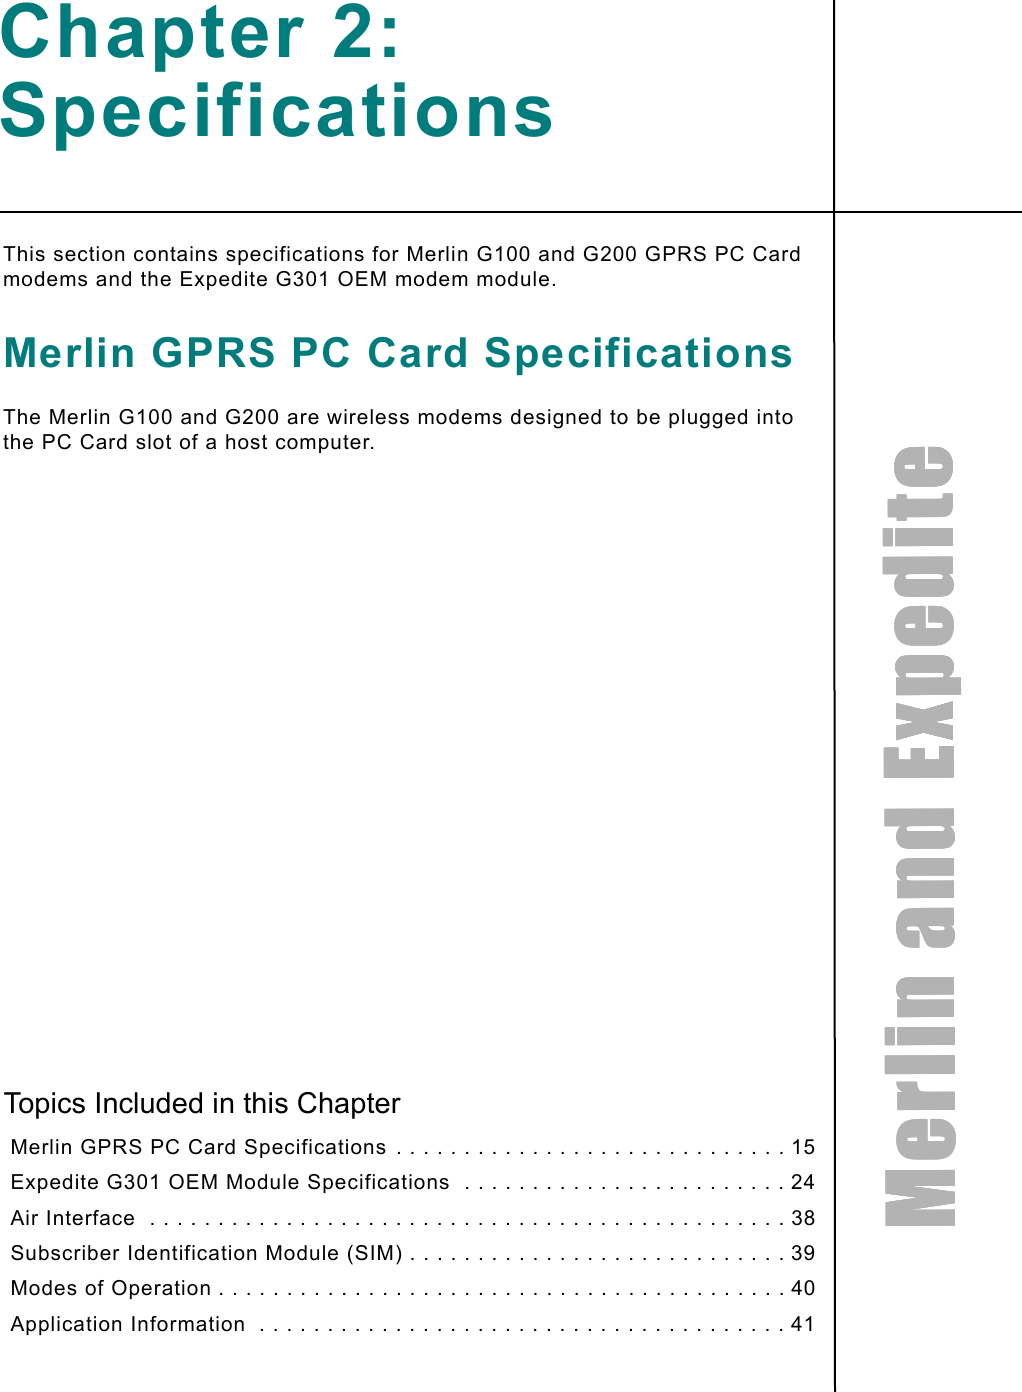 MMMMeeeerrrrlllliiiinnnn    aaaannnndddd    EEEExxxxppppeeeeddddiiiitttteeeeChapter 2: SpecificationsThis section contains specifications for Merlin G100 and G200 GPRS PC Card modems and the Expedite G301 OEM modem module.Merlin GPRS PC Card SpecificationsThe Merlin G100 and G200 are wireless modems designed to be plugged into the PC Card slot of a host computer.Topics Included in this Chapter Merlin GPRS PC Card Specifications . . . . . . . . . . . . . . . . . . . . . . . . . . . . . 15 Expedite G301 OEM Module Specifications  . . . . . . . . . . . . . . . . . . . . . . . . 24 Air Interface  . . . . . . . . . . . . . . . . . . . . . . . . . . . . . . . . . . . . . . . . . . . . . . . 38 Subscriber Identification Module (SIM) . . . . . . . . . . . . . . . . . . . . . . . . . . . . 39 Modes of Operation . . . . . . . . . . . . . . . . . . . . . . . . . . . . . . . . . . . . . . . . . . 40 Application Information  . . . . . . . . . . . . . . . . . . . . . . . . . . . . . . . . . . . . . . . 41